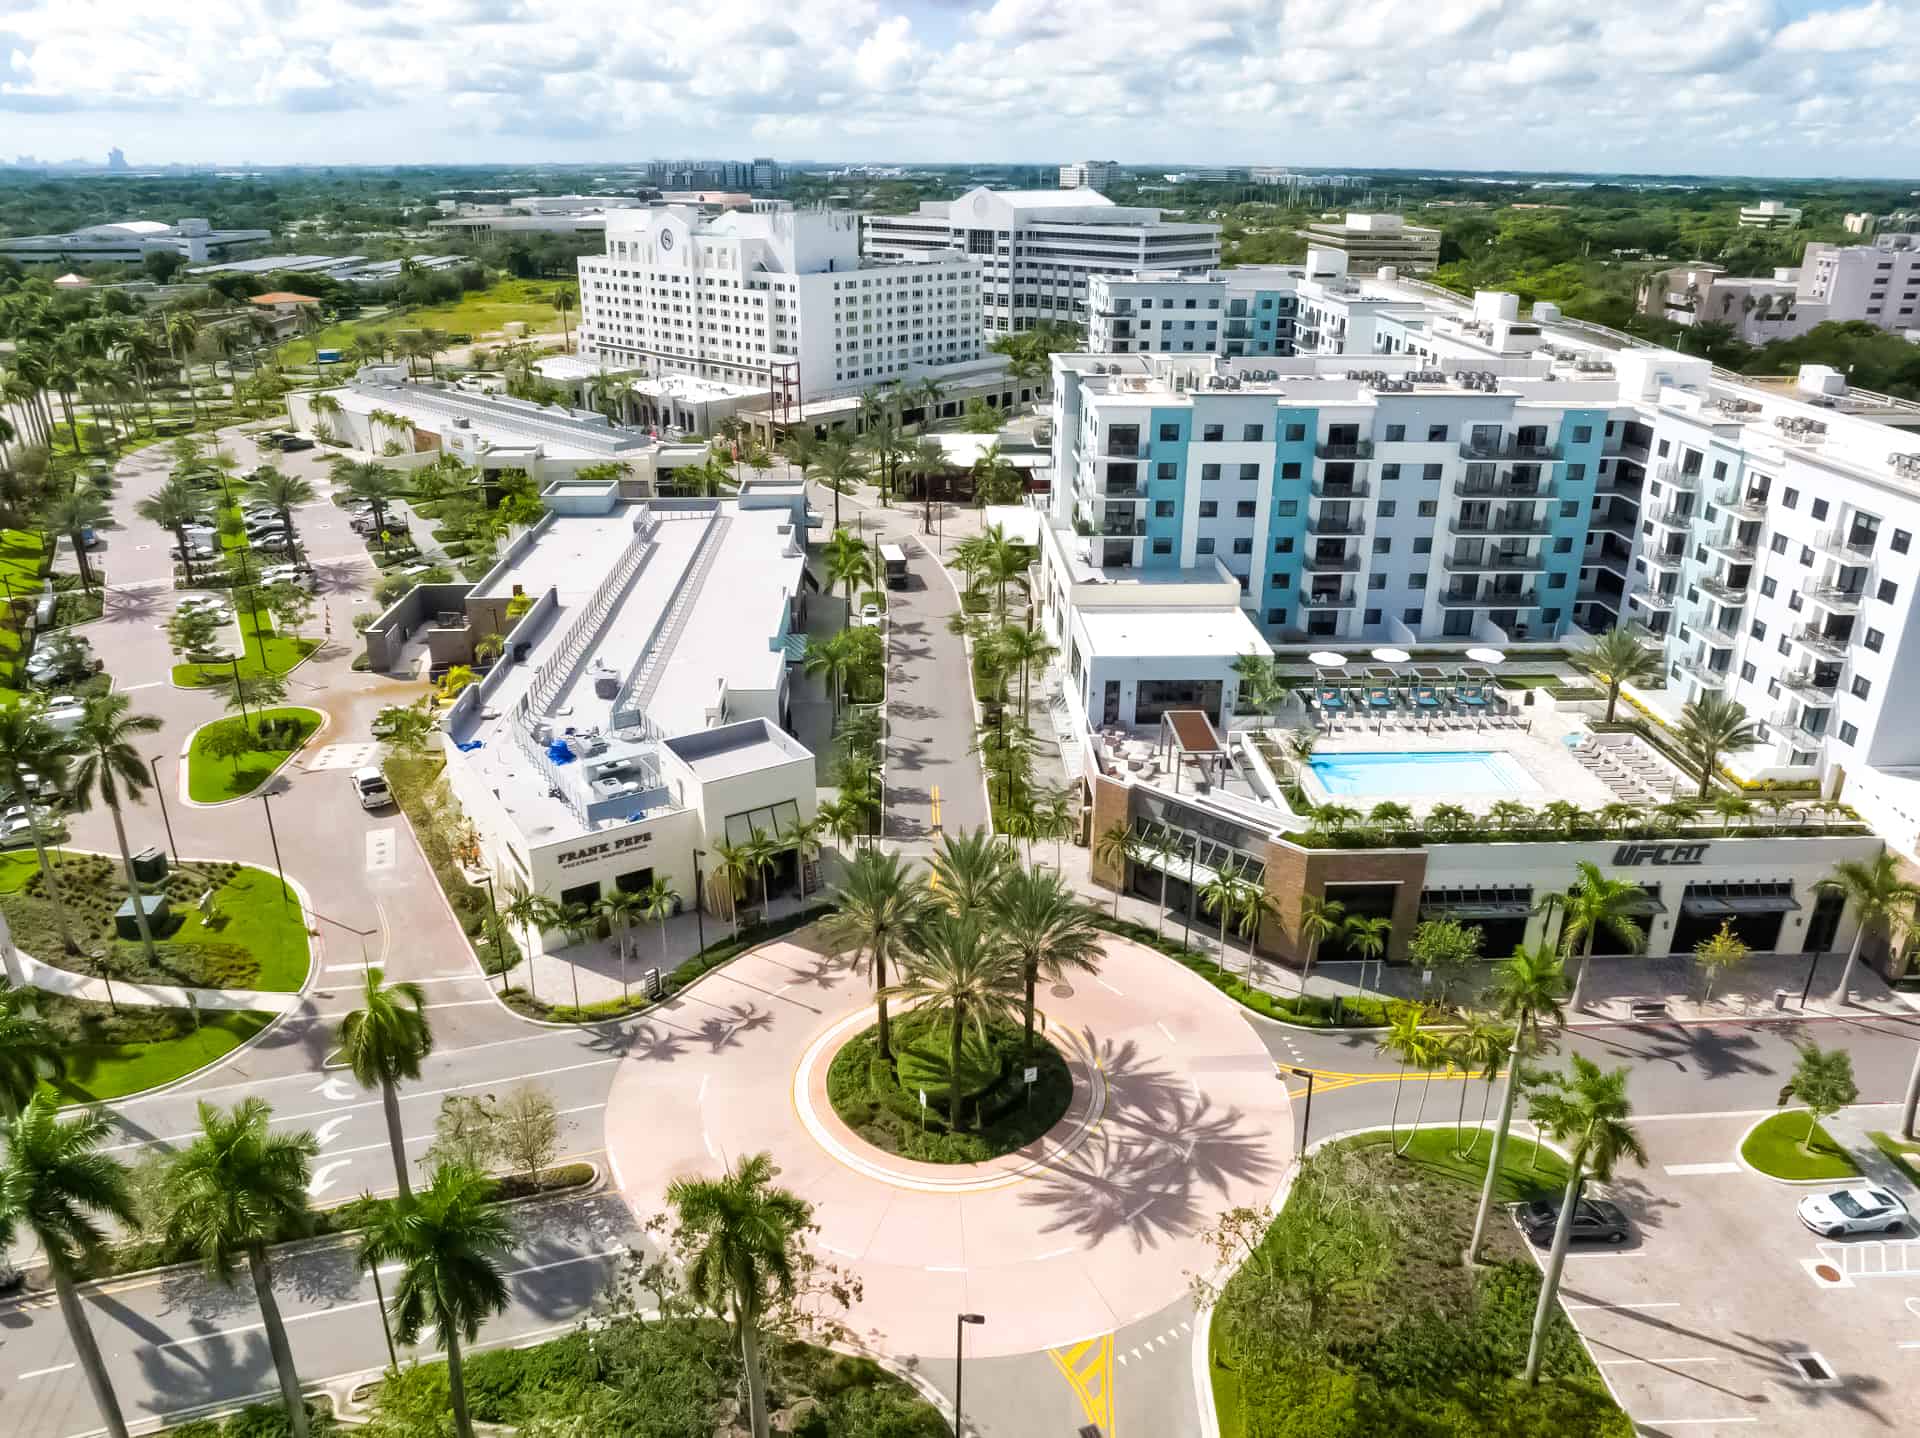 Aerial view of Plantation Walk roundabout, storefronts, and nearby hotel